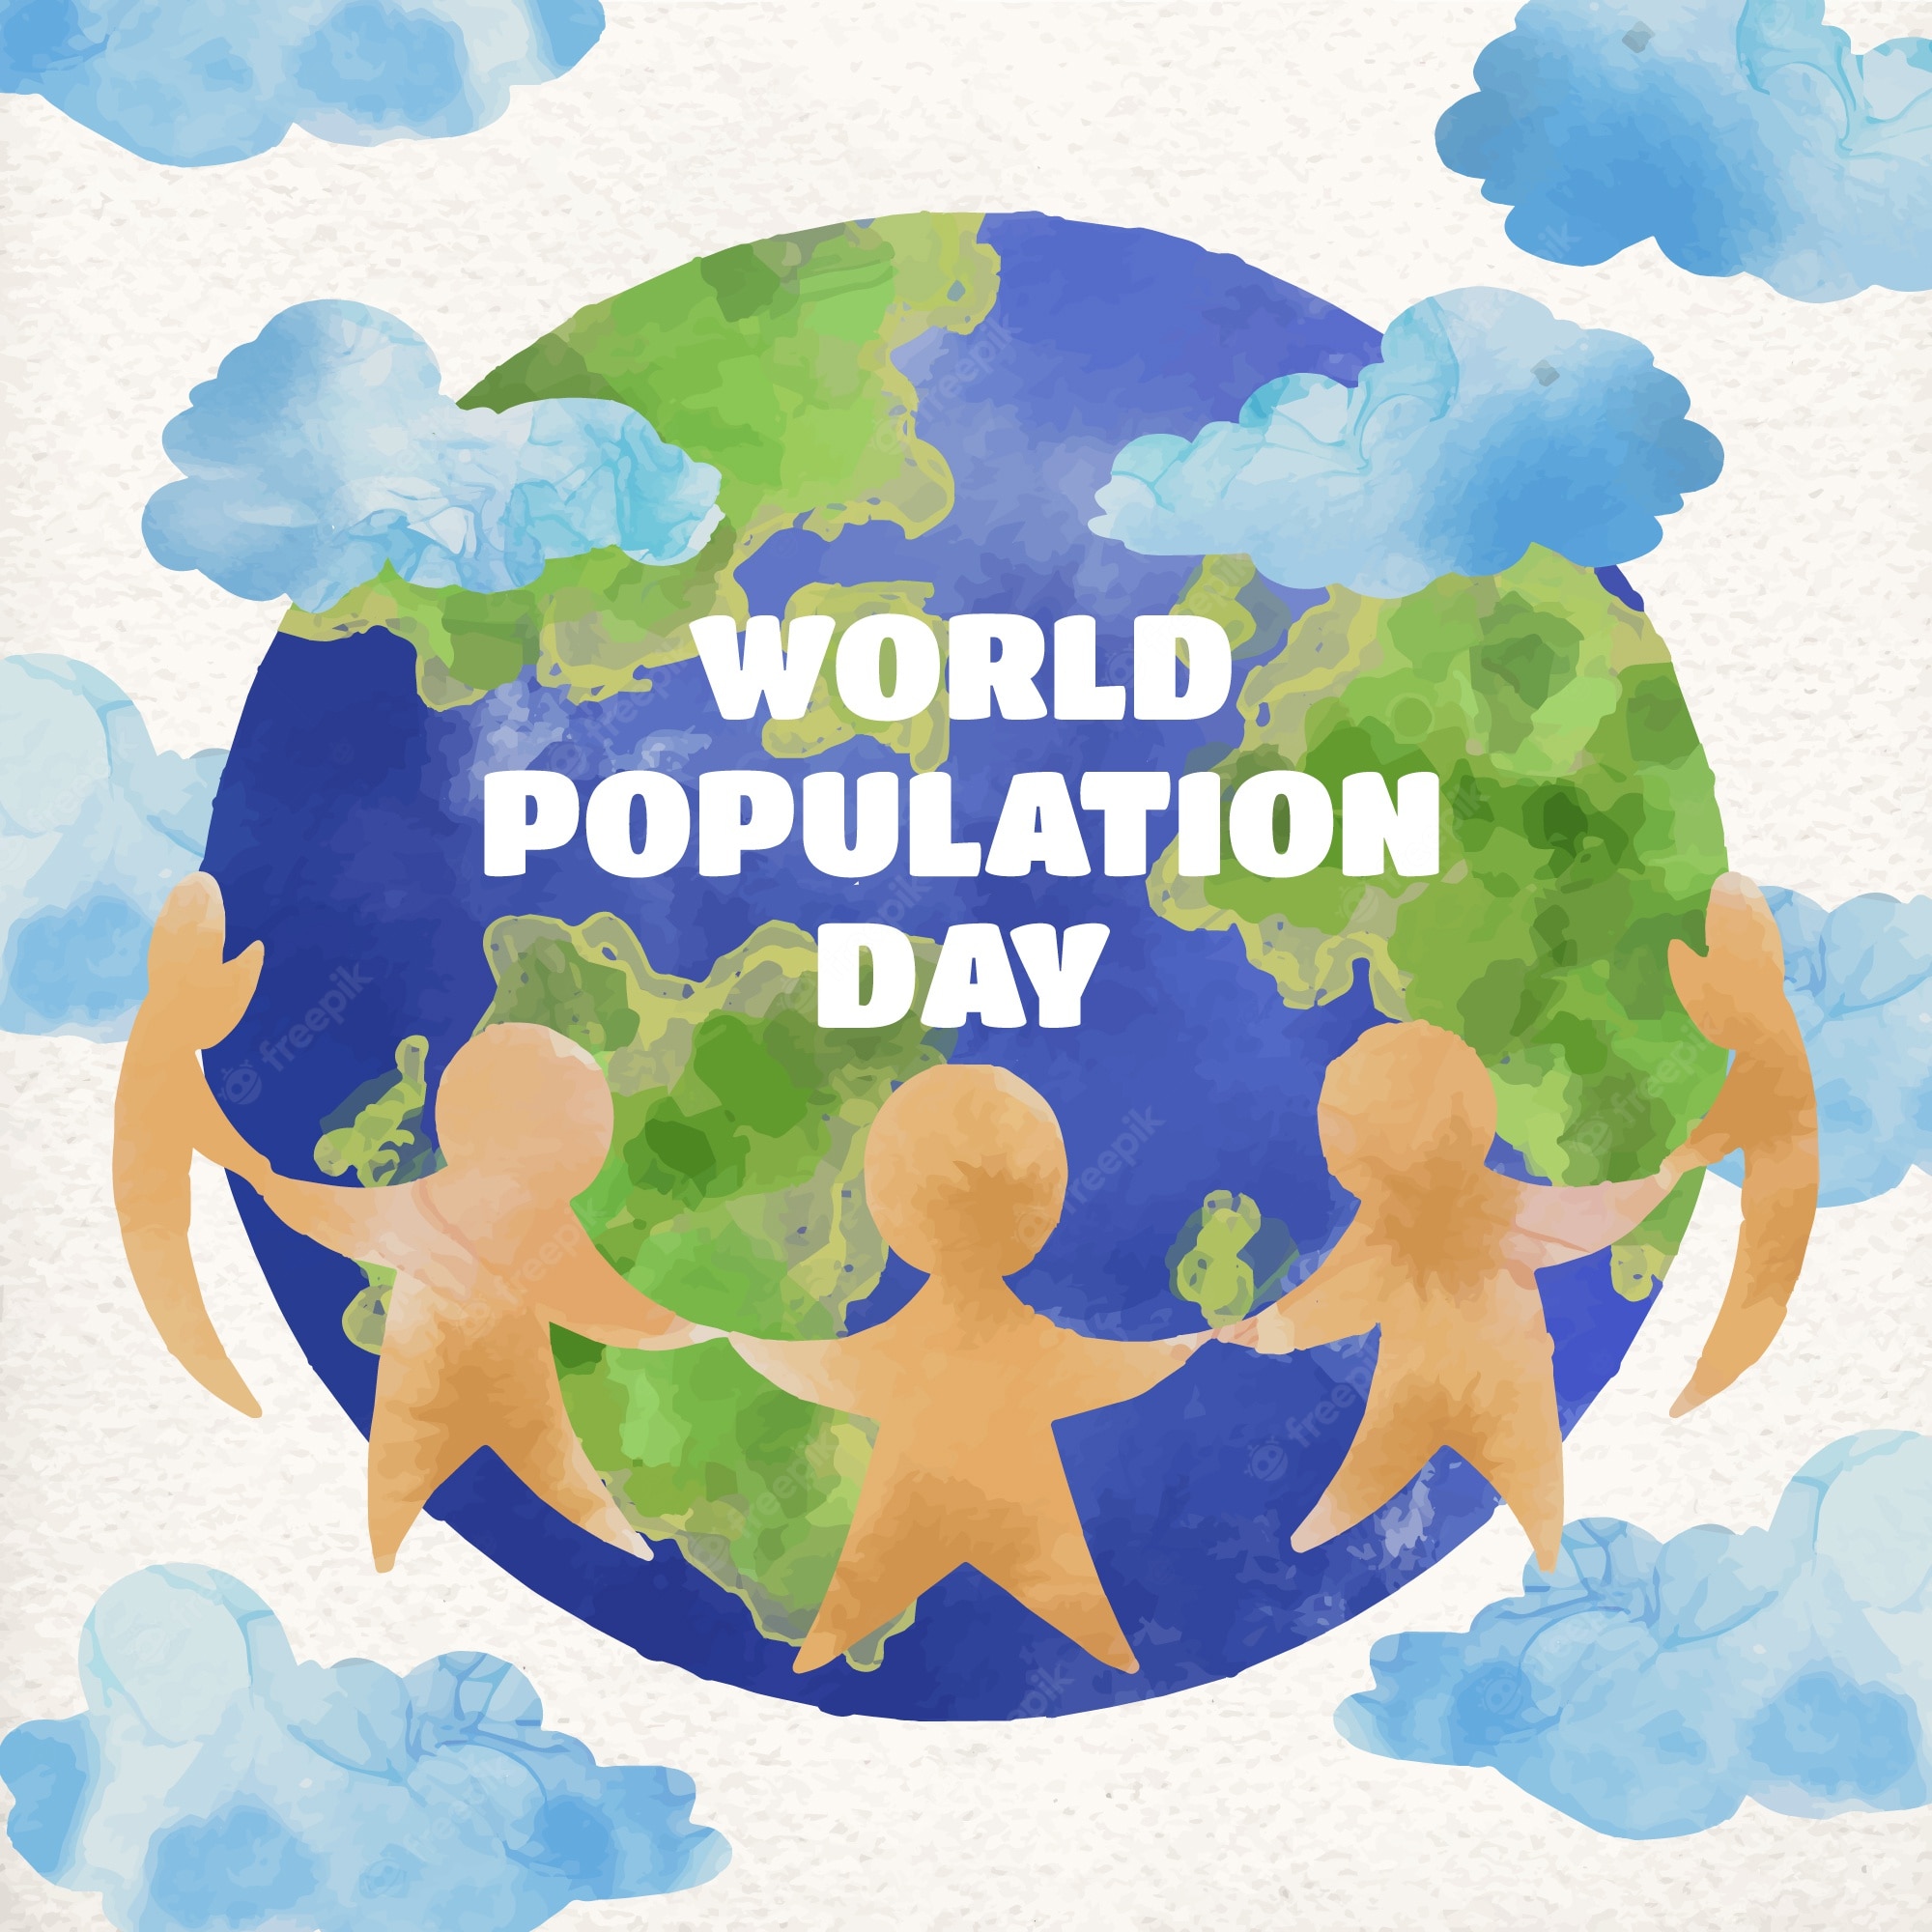 World population day easy drawing || Poster drawing on world population day  - step by step - Yo… | Poster drawing, Easy drawings, World population day  poster design